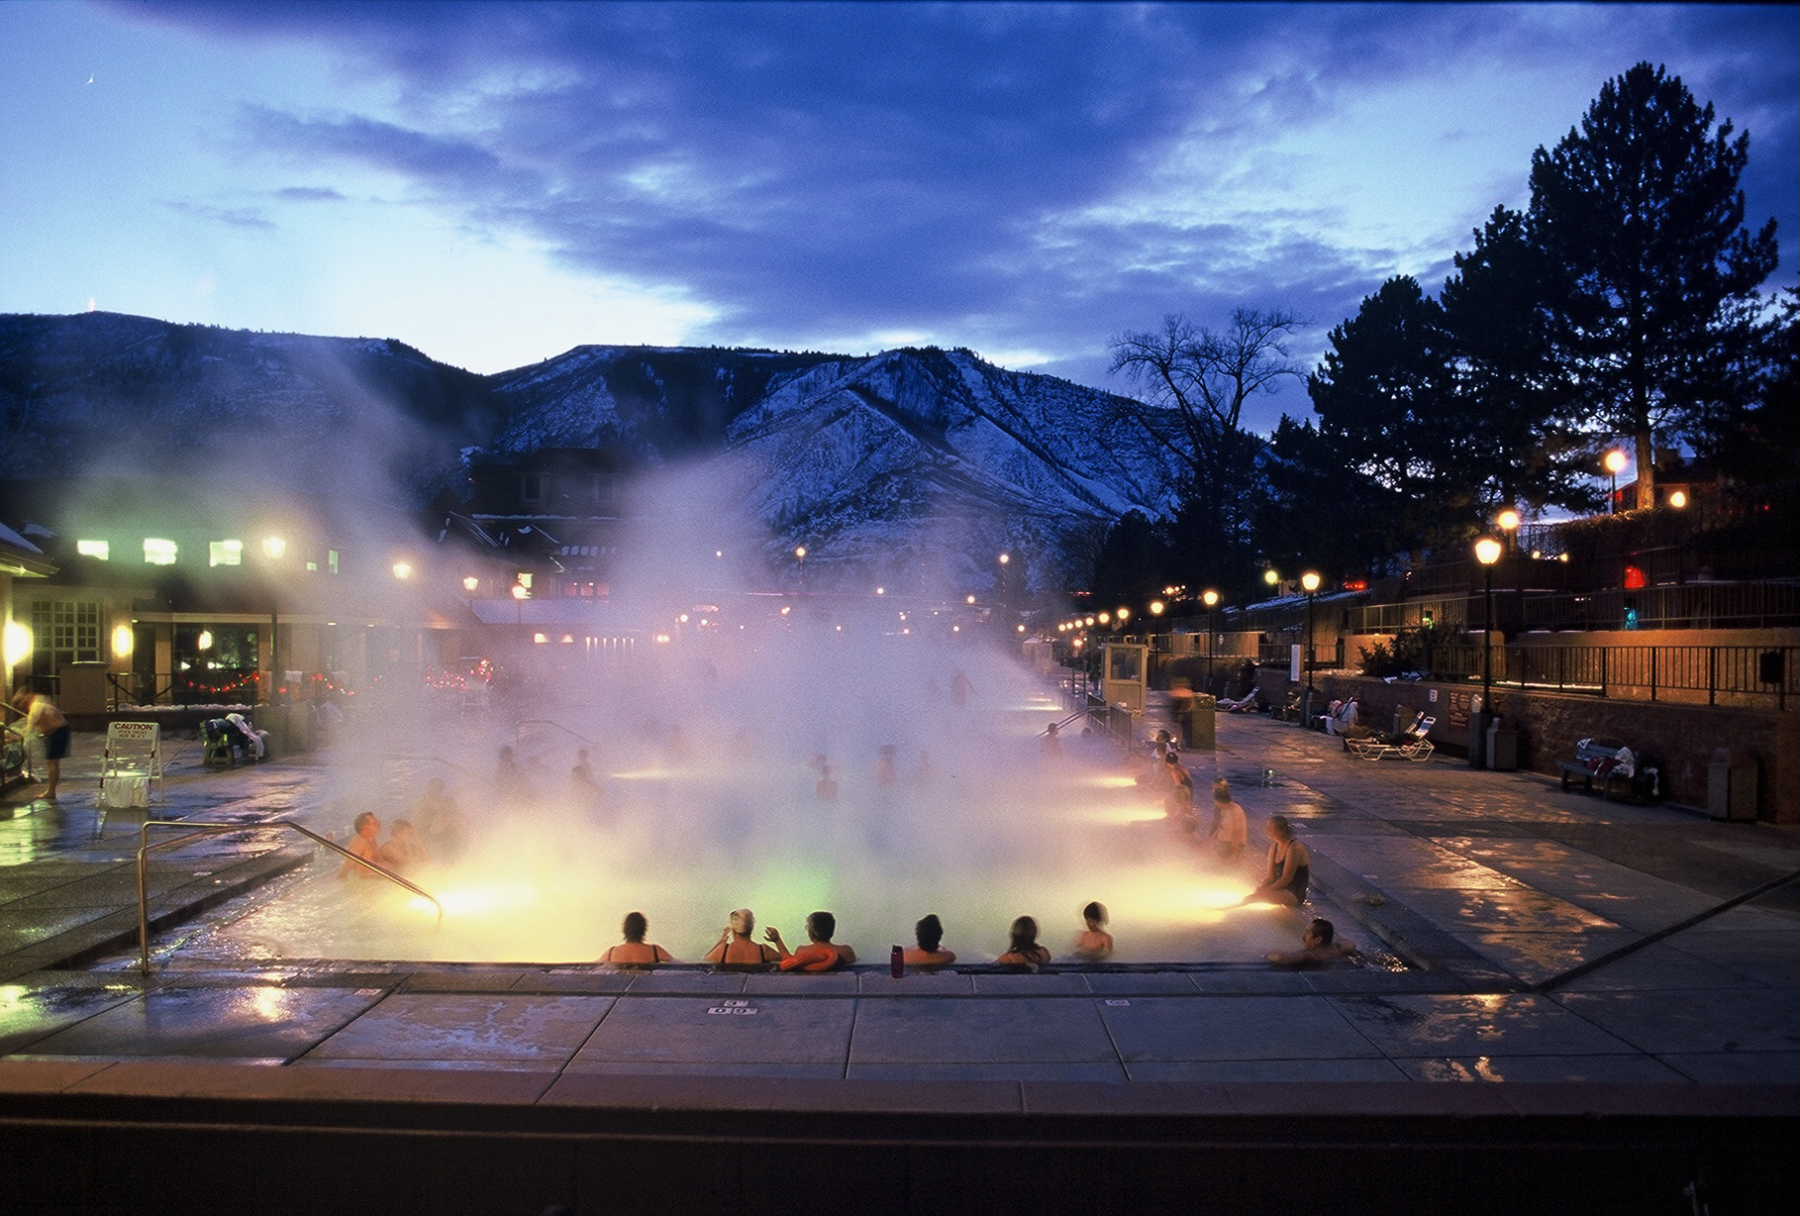 Aspen, Colorado Heated Swimming Pool Party